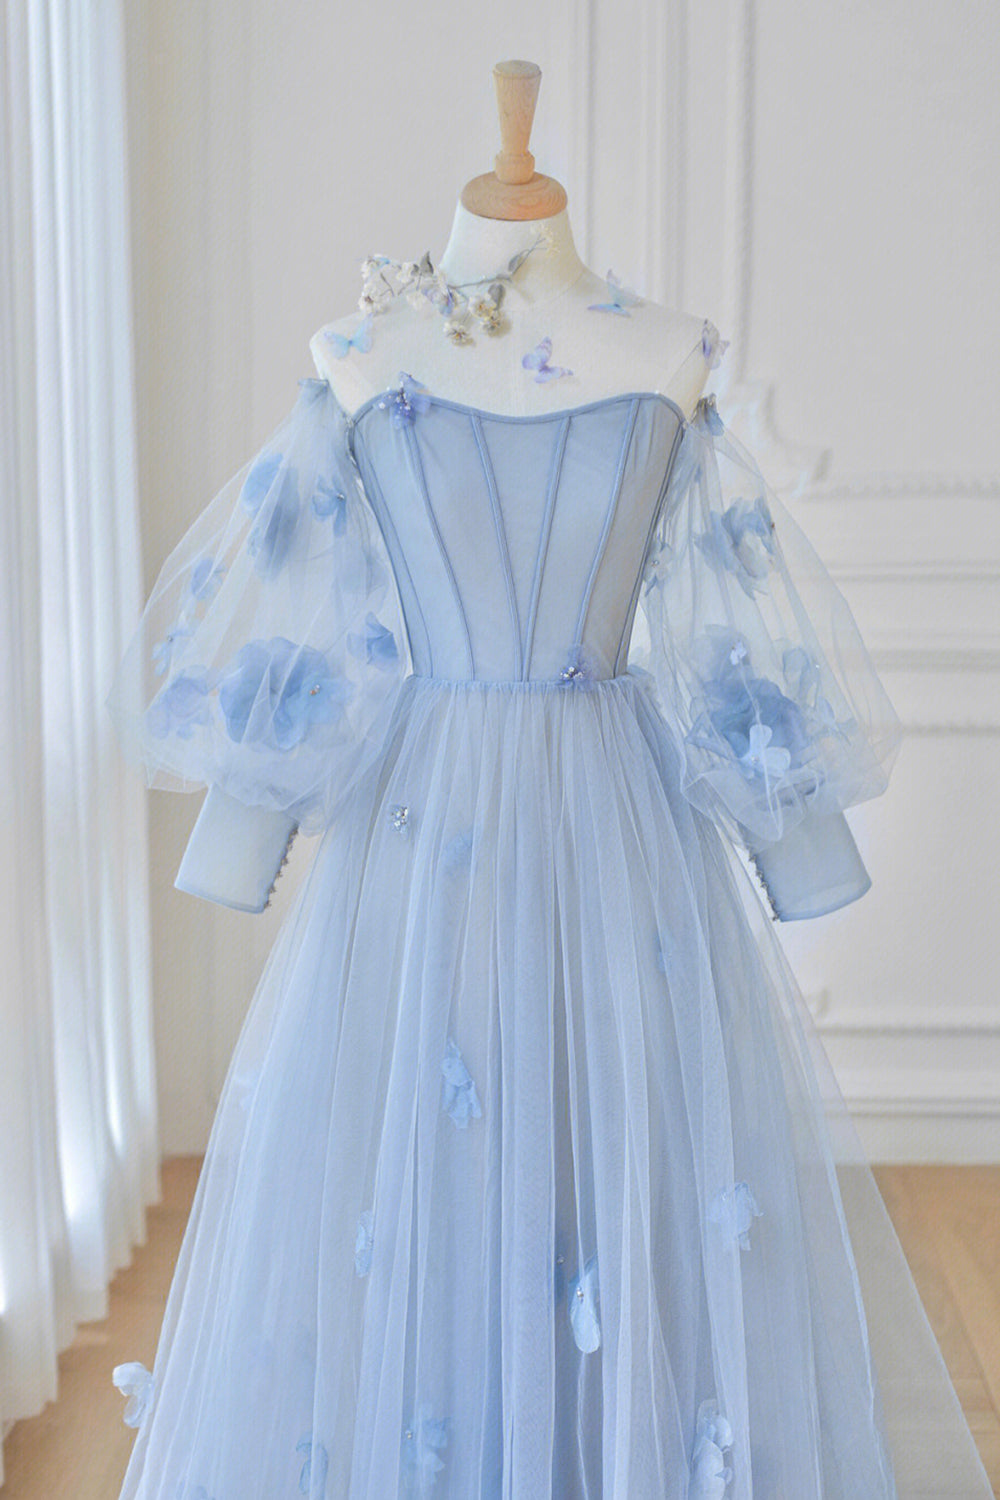 Formal Dress Shops Near Me, Blue Tulle Long Sleeve Prom Dresses, Cute A-Line Evening Dresses with Applique